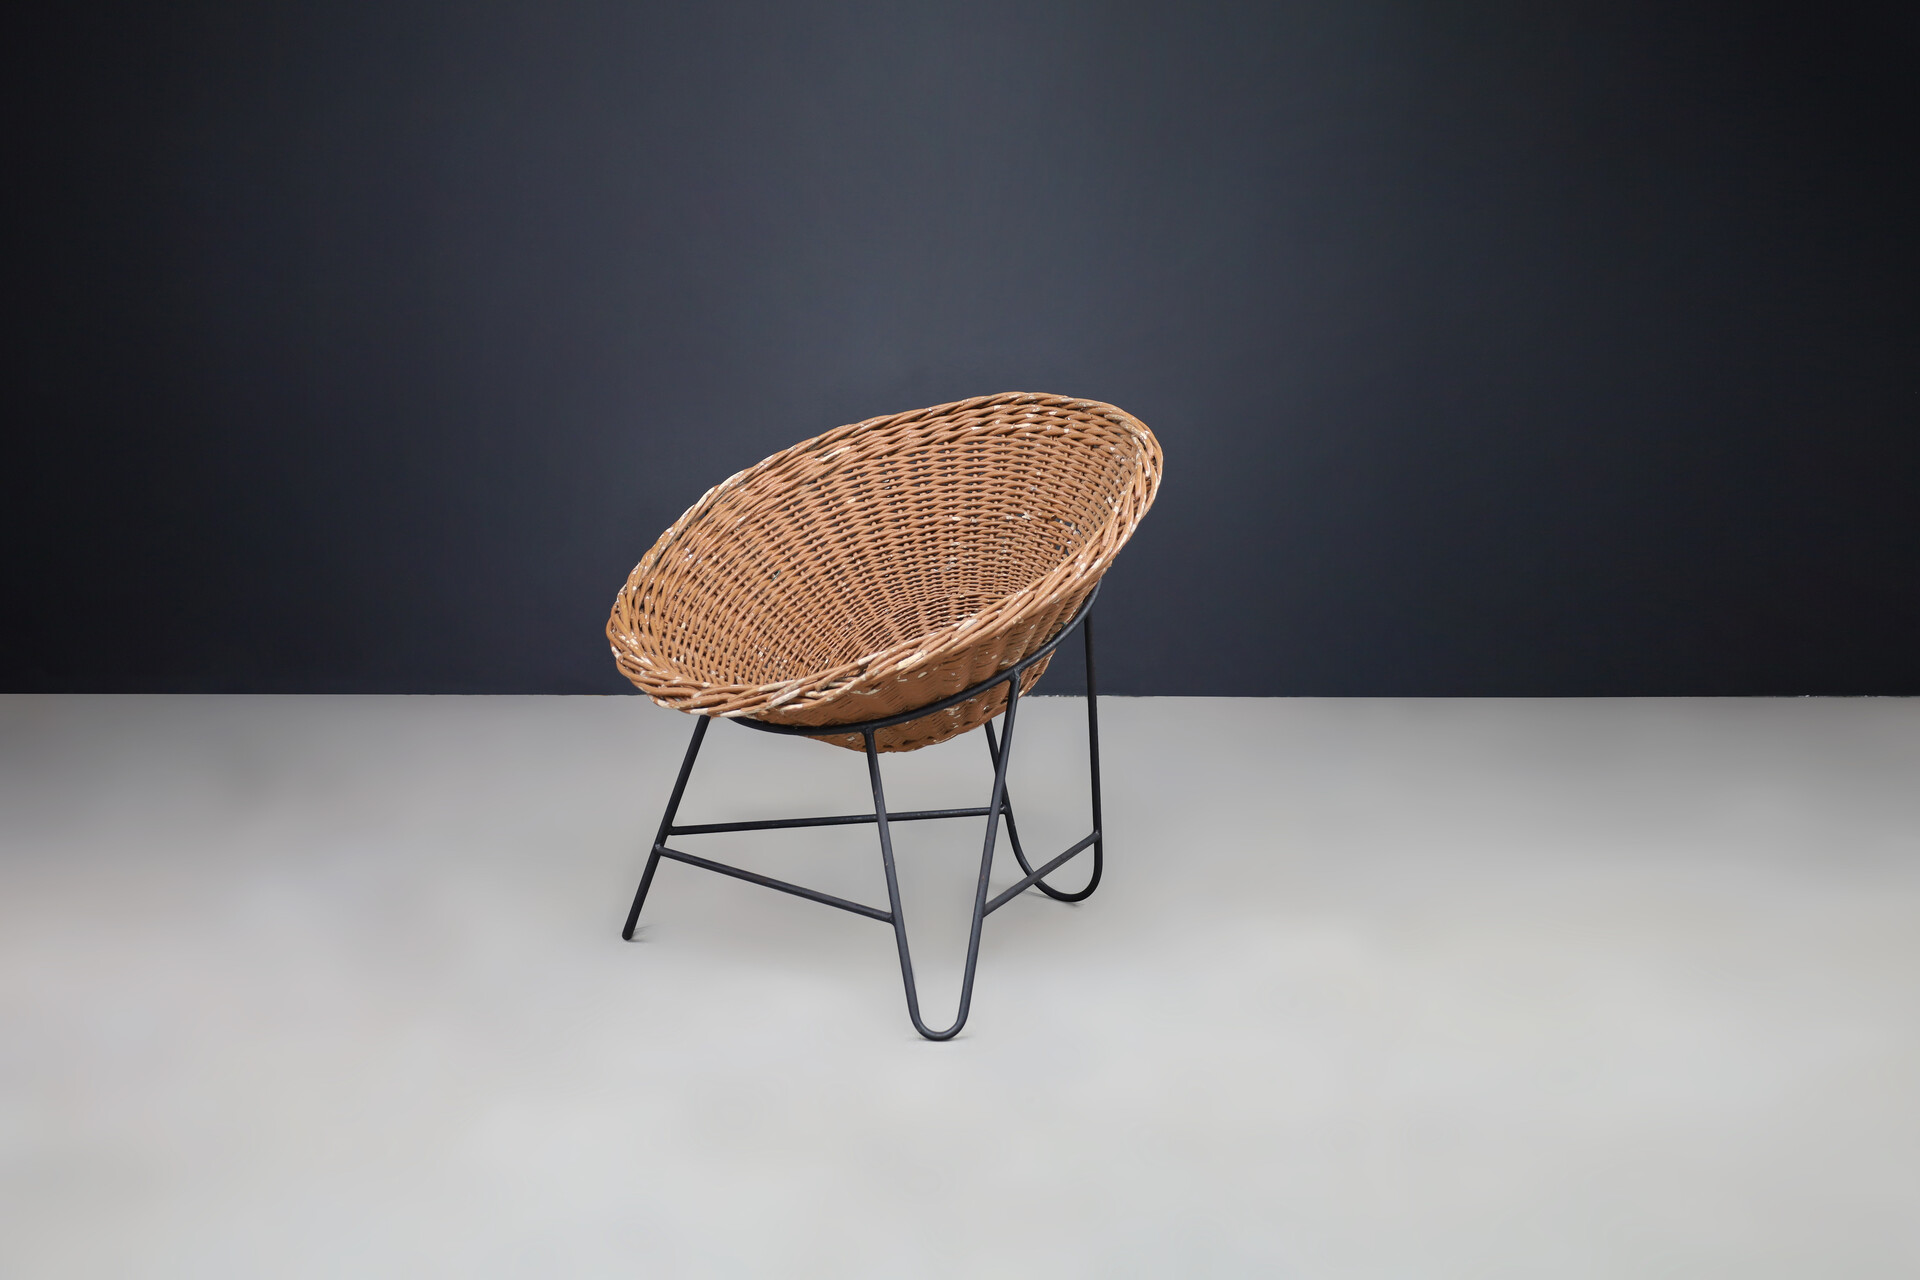 Mid century modern Wicker and black frame Lounge basket chair, France 1950s Mid-20th century